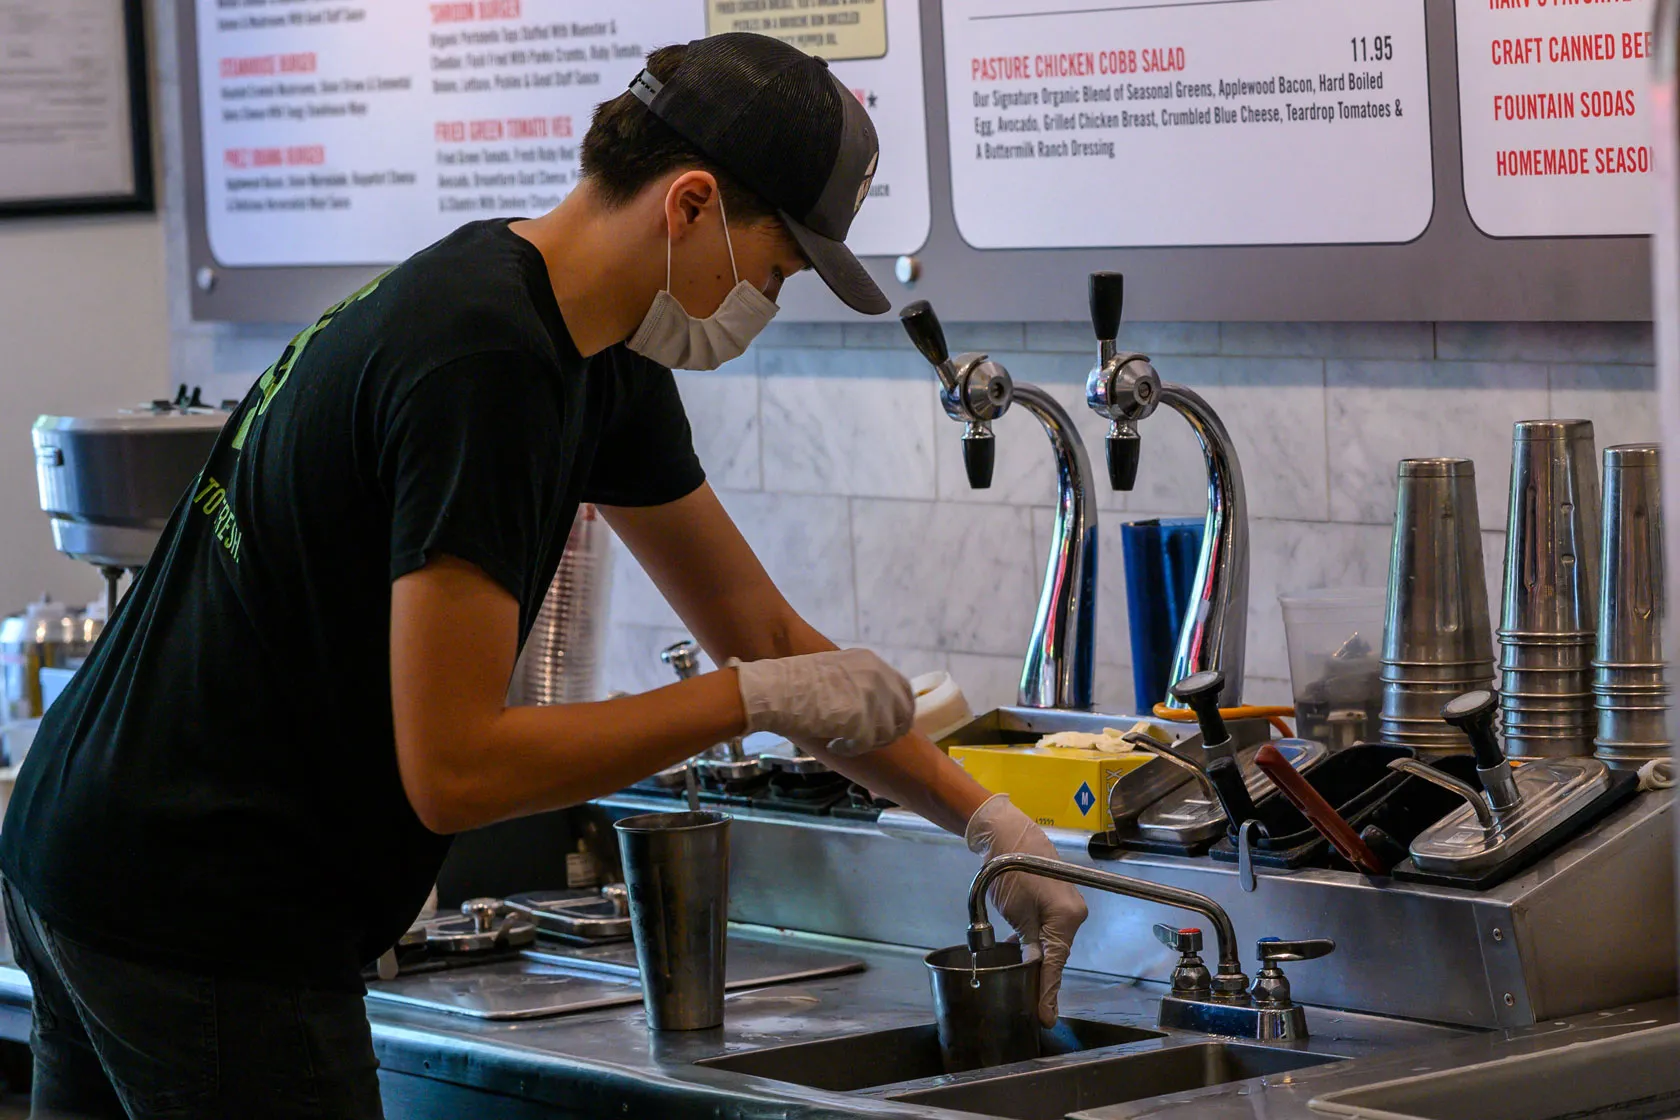 A young man washes cups in a fast food restaurant.